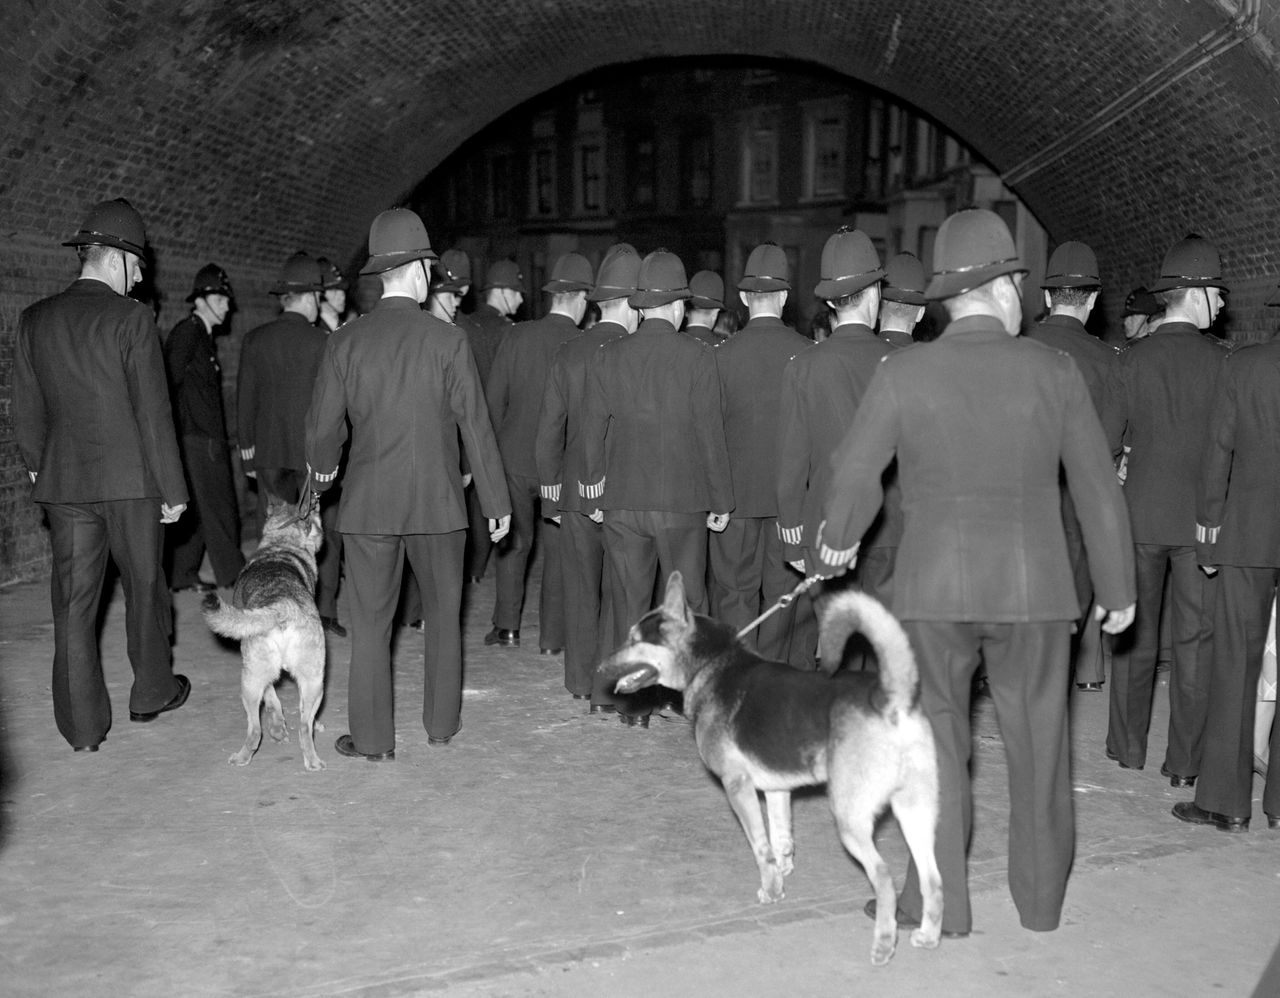 Police officers with dogs at a street in Notting Hill during riots in Notting Hlil, 1958